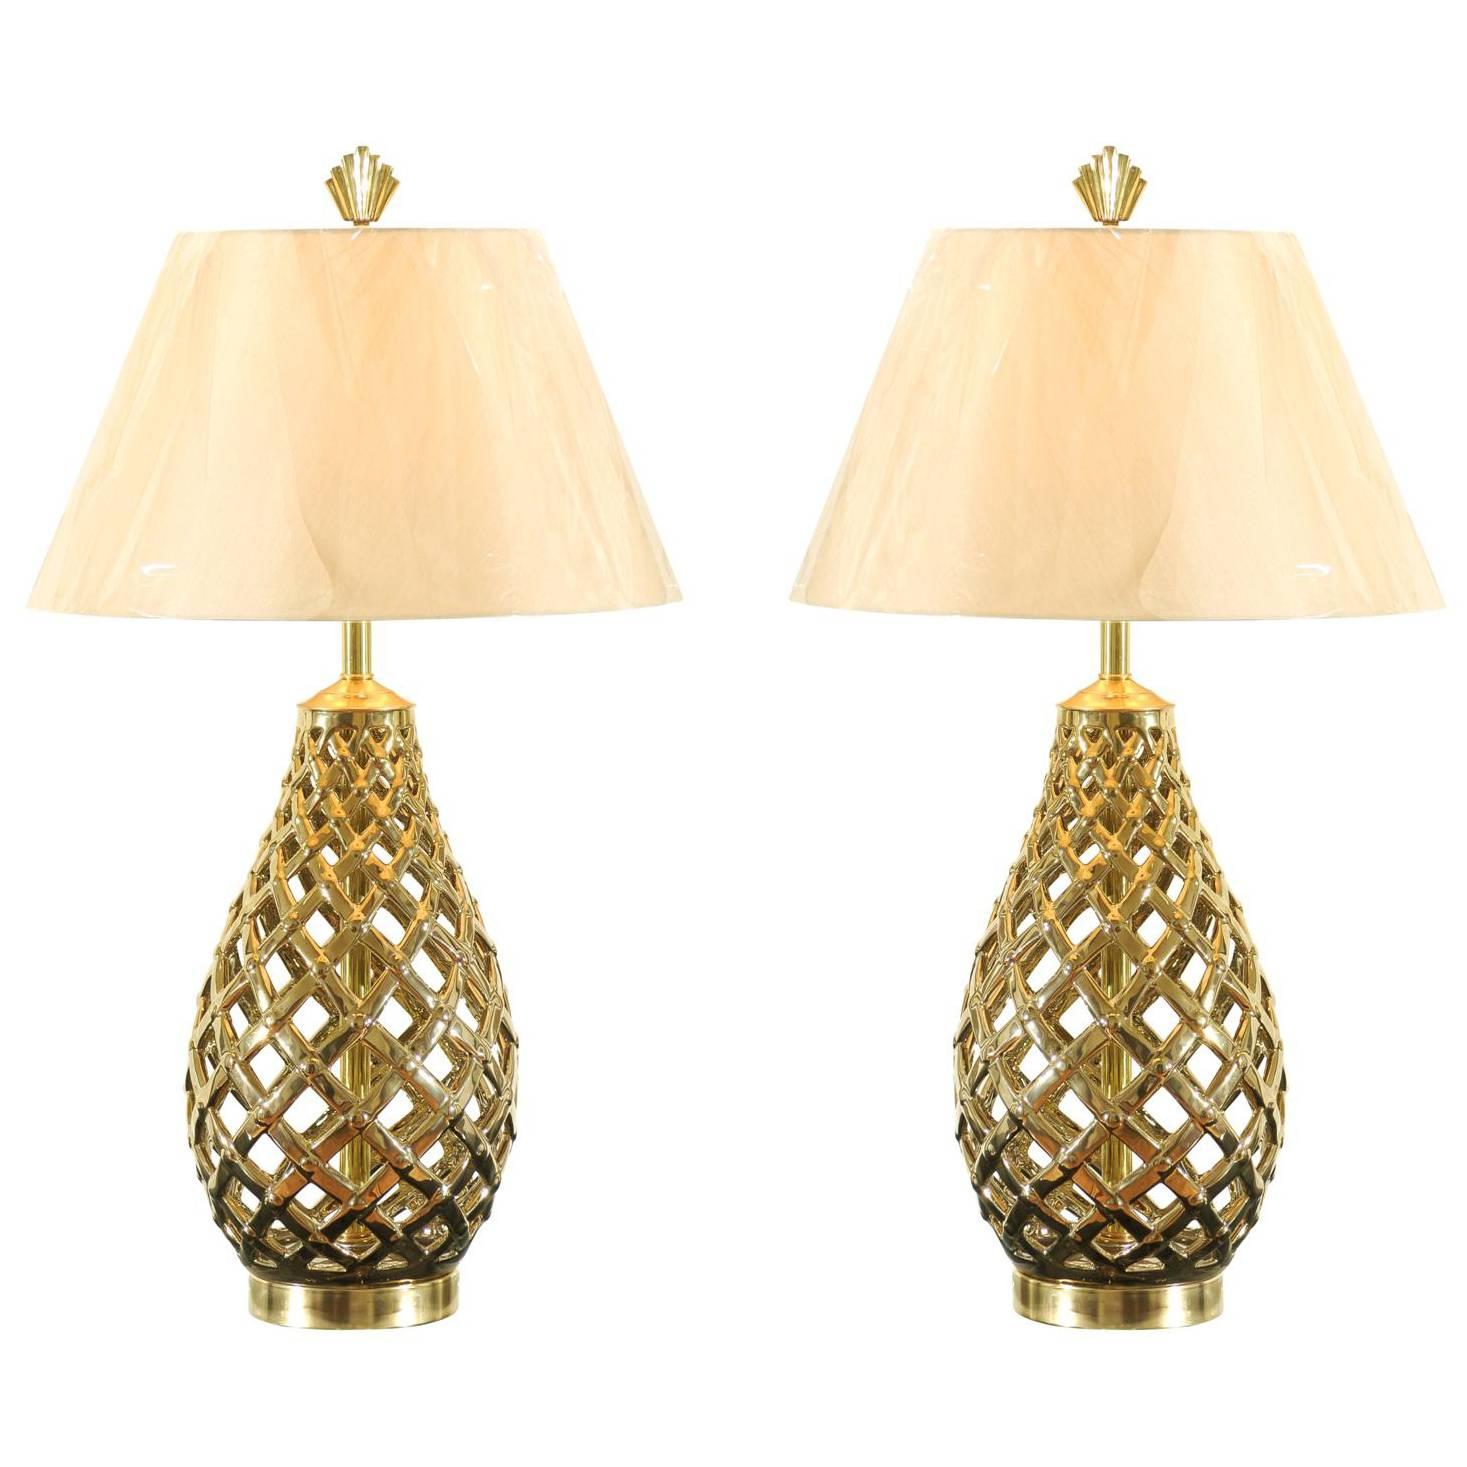 Lovely Restored Pair of Pierced Ceramic, Brass and Lucite Lamps